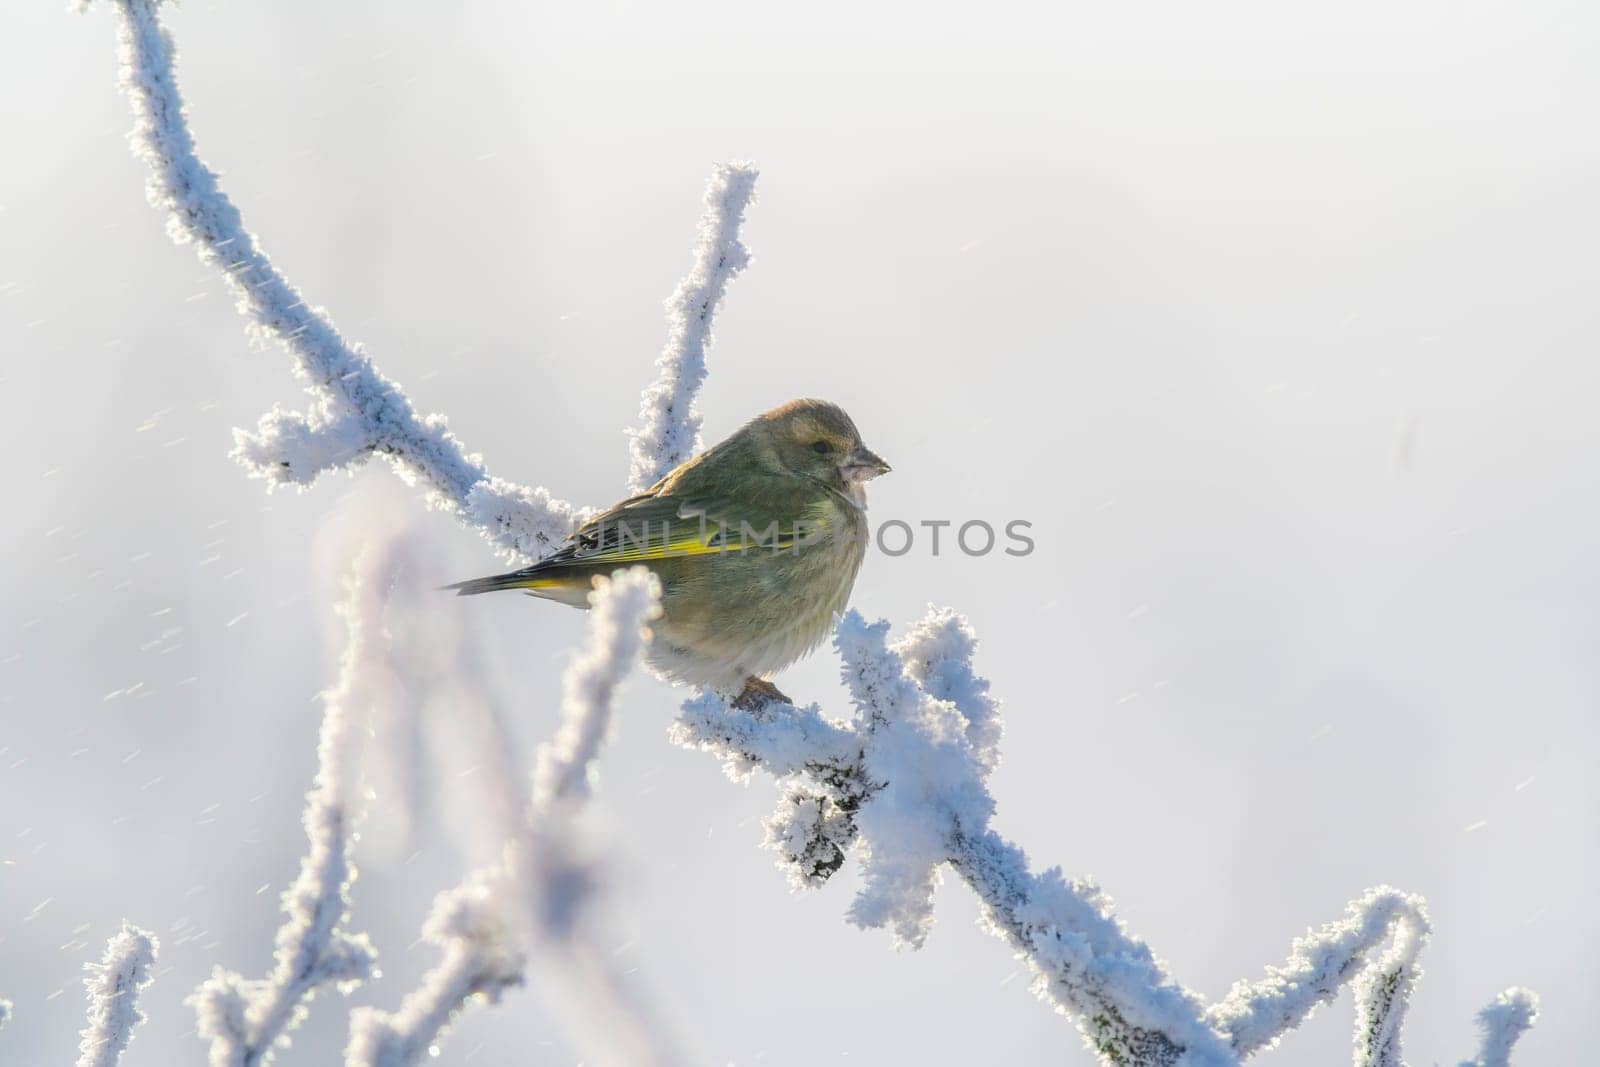 a greenfinch sits on a snowy branch in the cold winter by mario_plechaty_photography